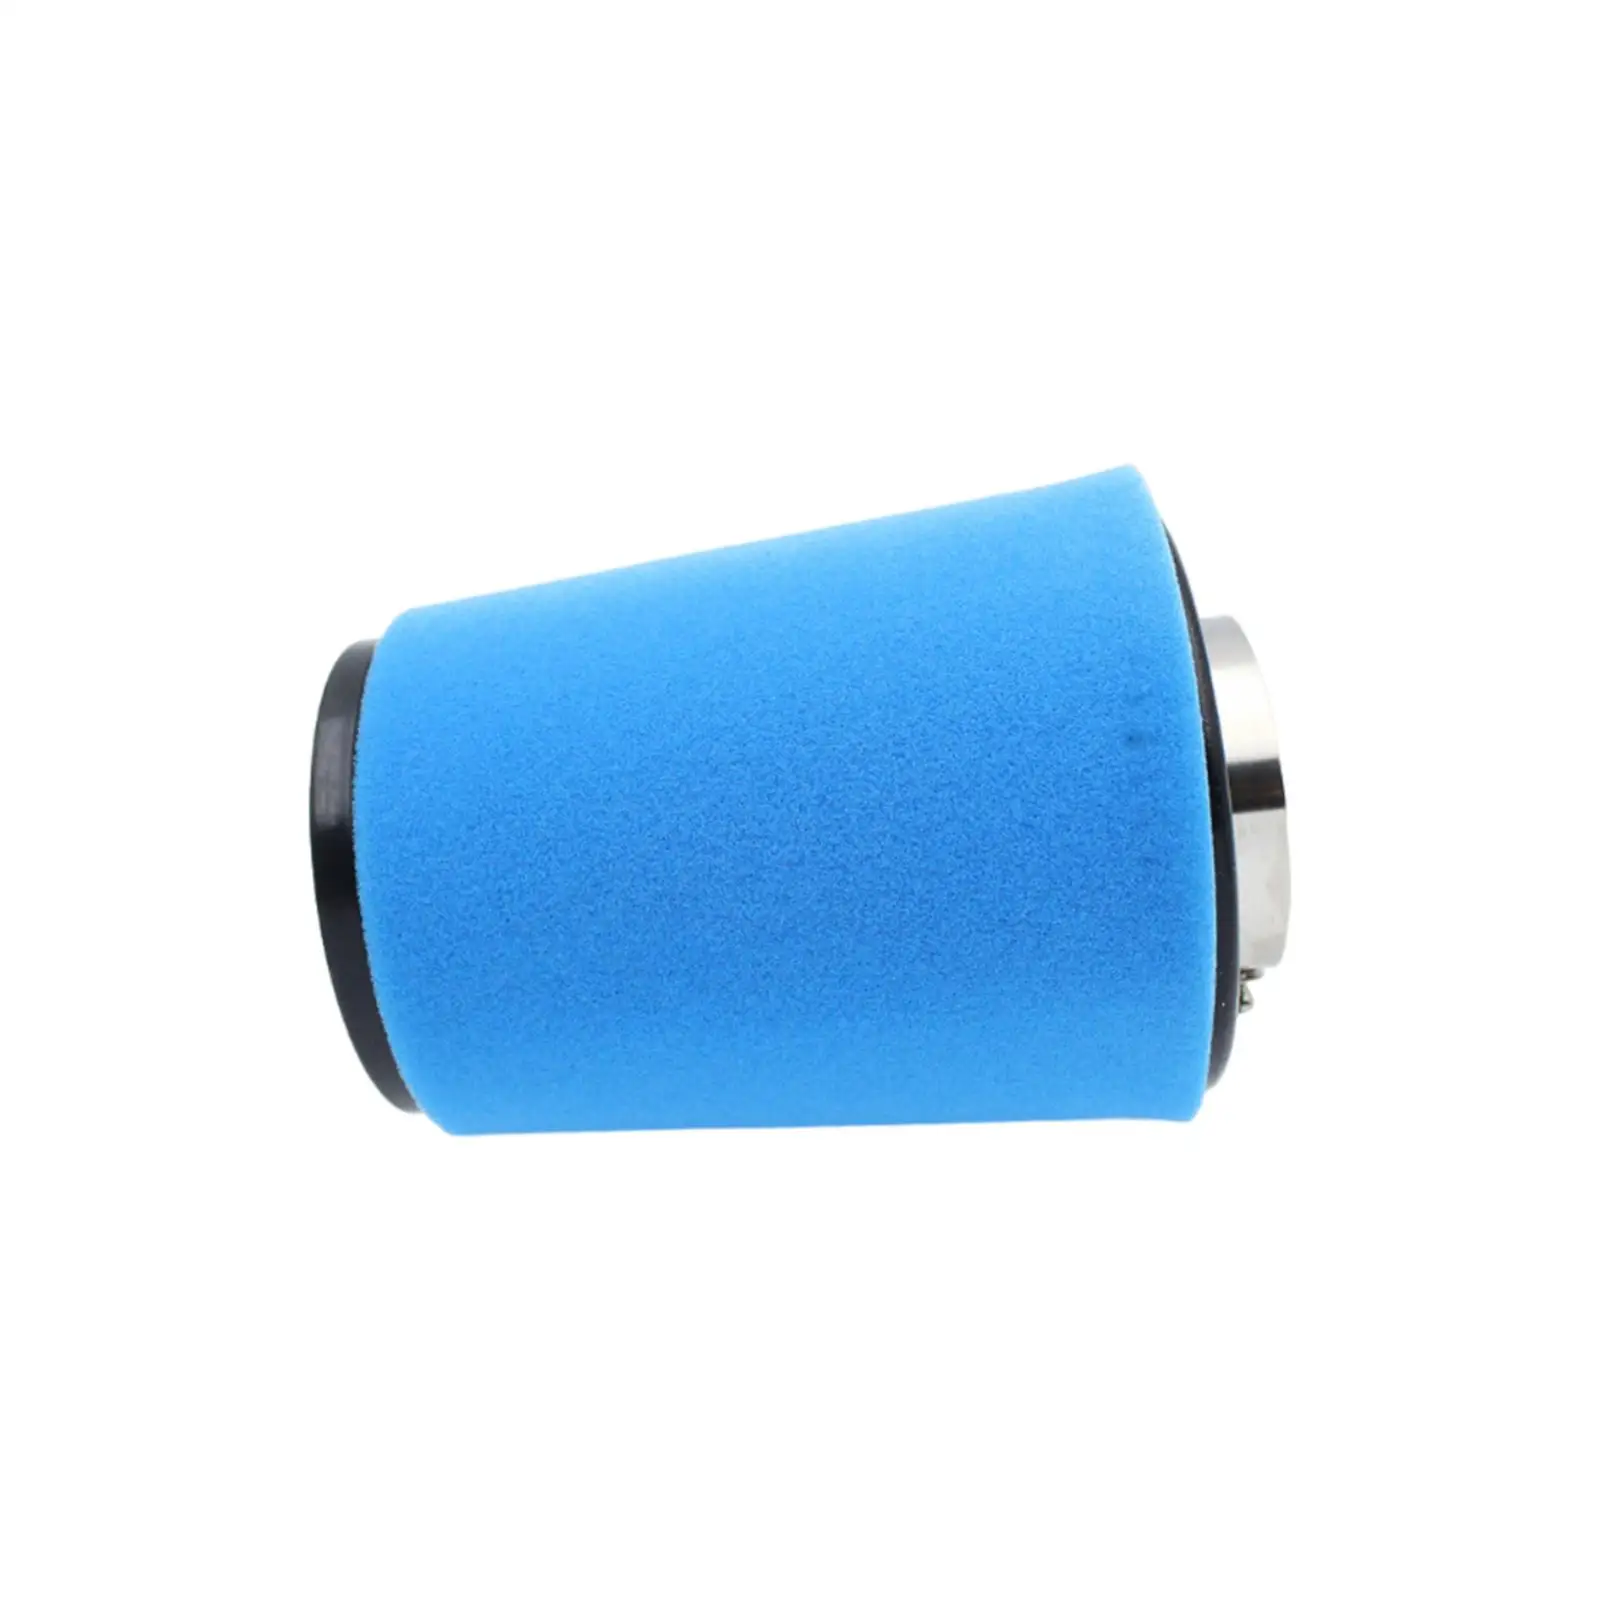 Motorcycle Air Filter Cleaner 0800-112000 High Quality for Cfmoto x8 Zforce 500 800 Uforce 500 800 Cforce 400 500 500S 800